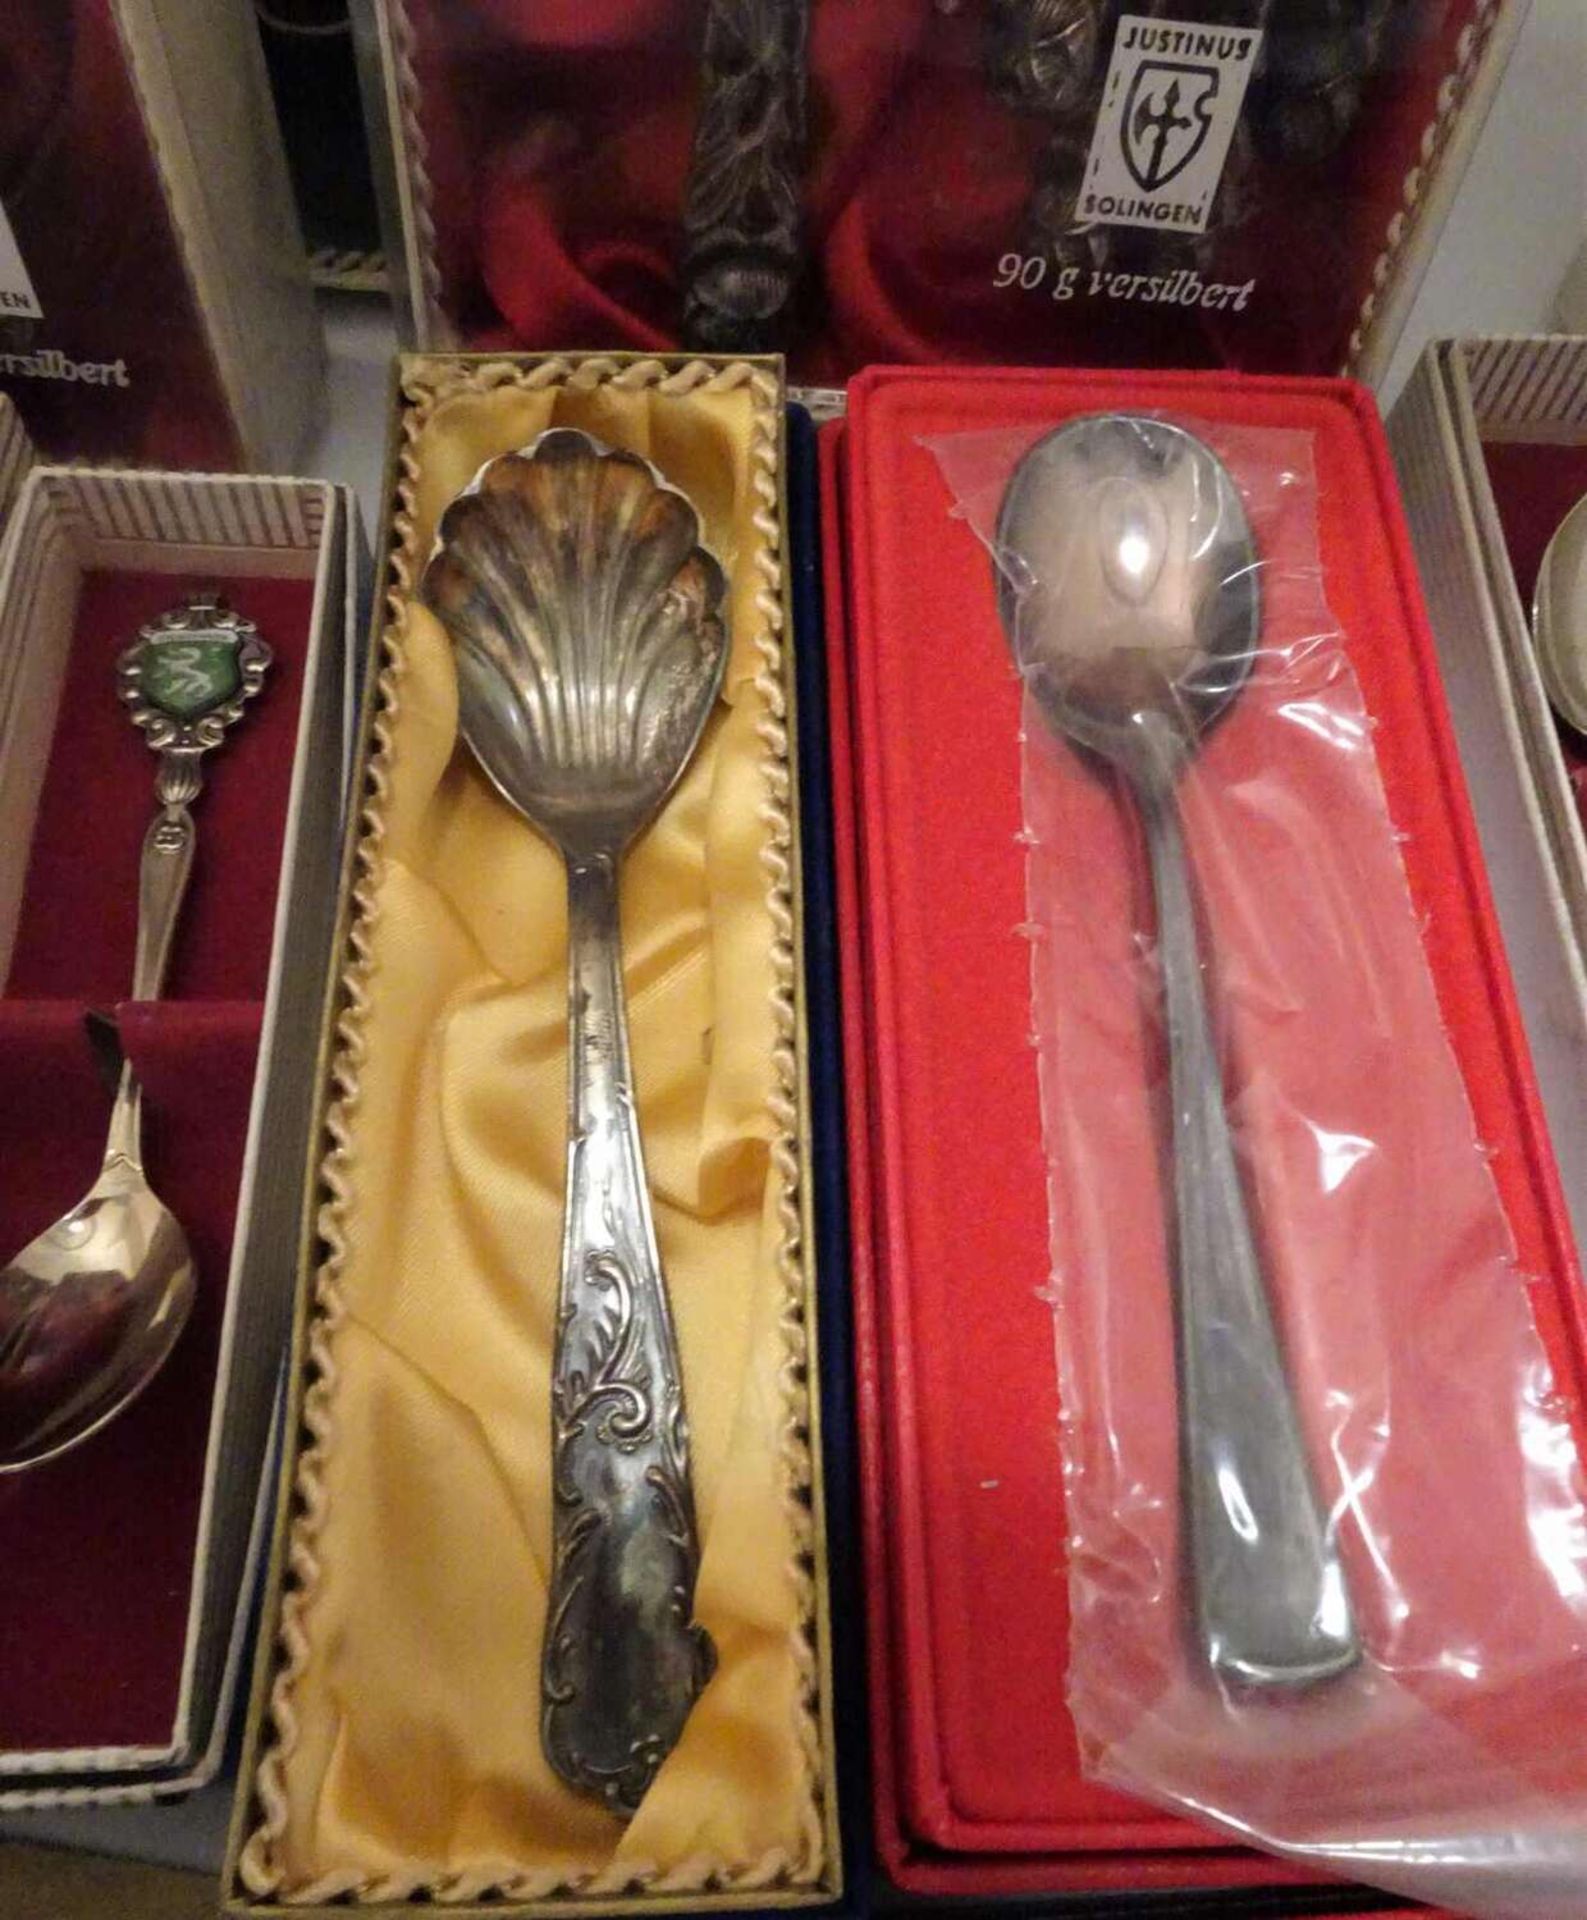 Lot versilberte Besteckteile, dabei auch Andenkenlöffel Lot of silver-plated pieces of cutlery, - Image 2 of 3